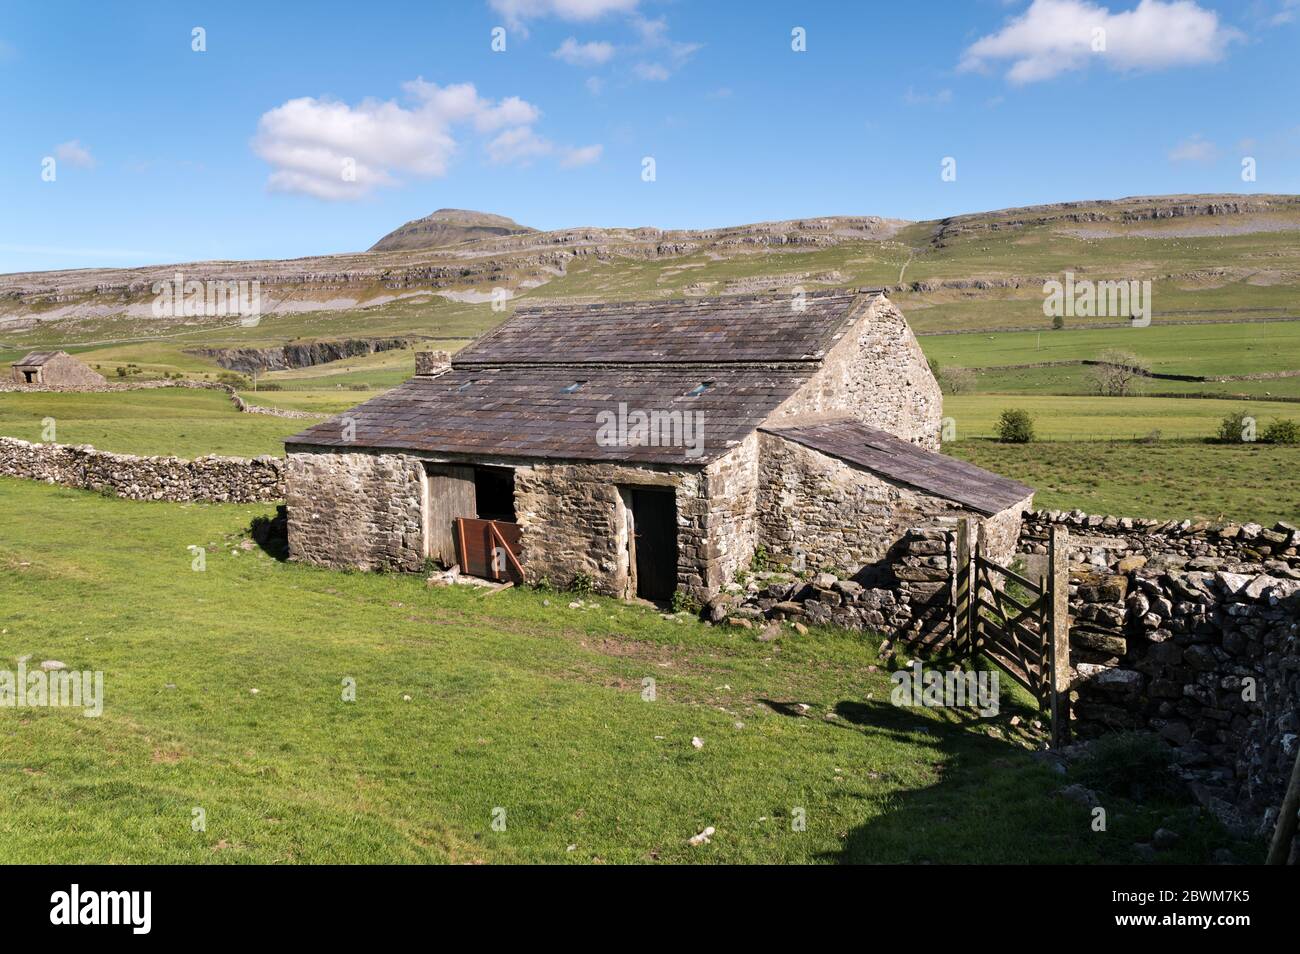 A view of Ingleborough (horizon) from the north. A tradition Dales barn or cow house in the foreground. Ingleton, Yorkshire Dales National Park, UK Stock Photo